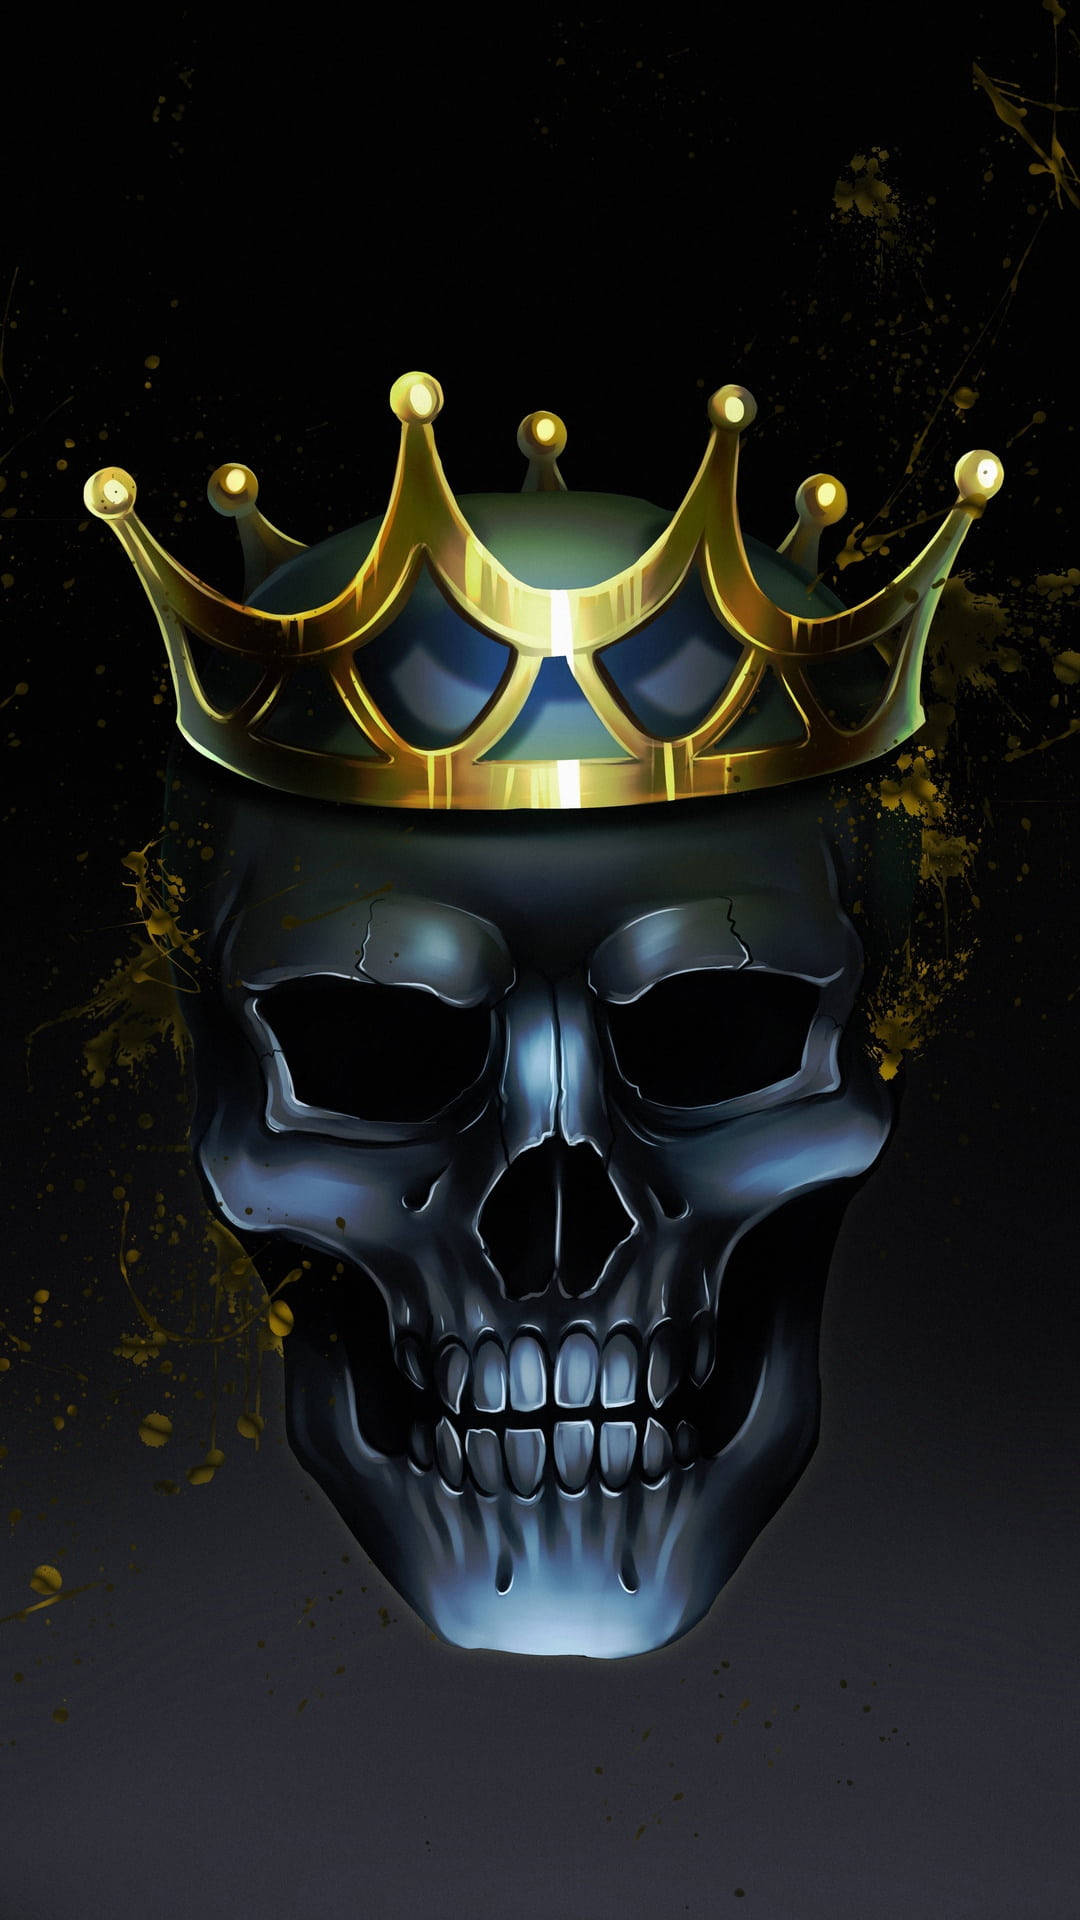 Black Gangster Skull With Crown